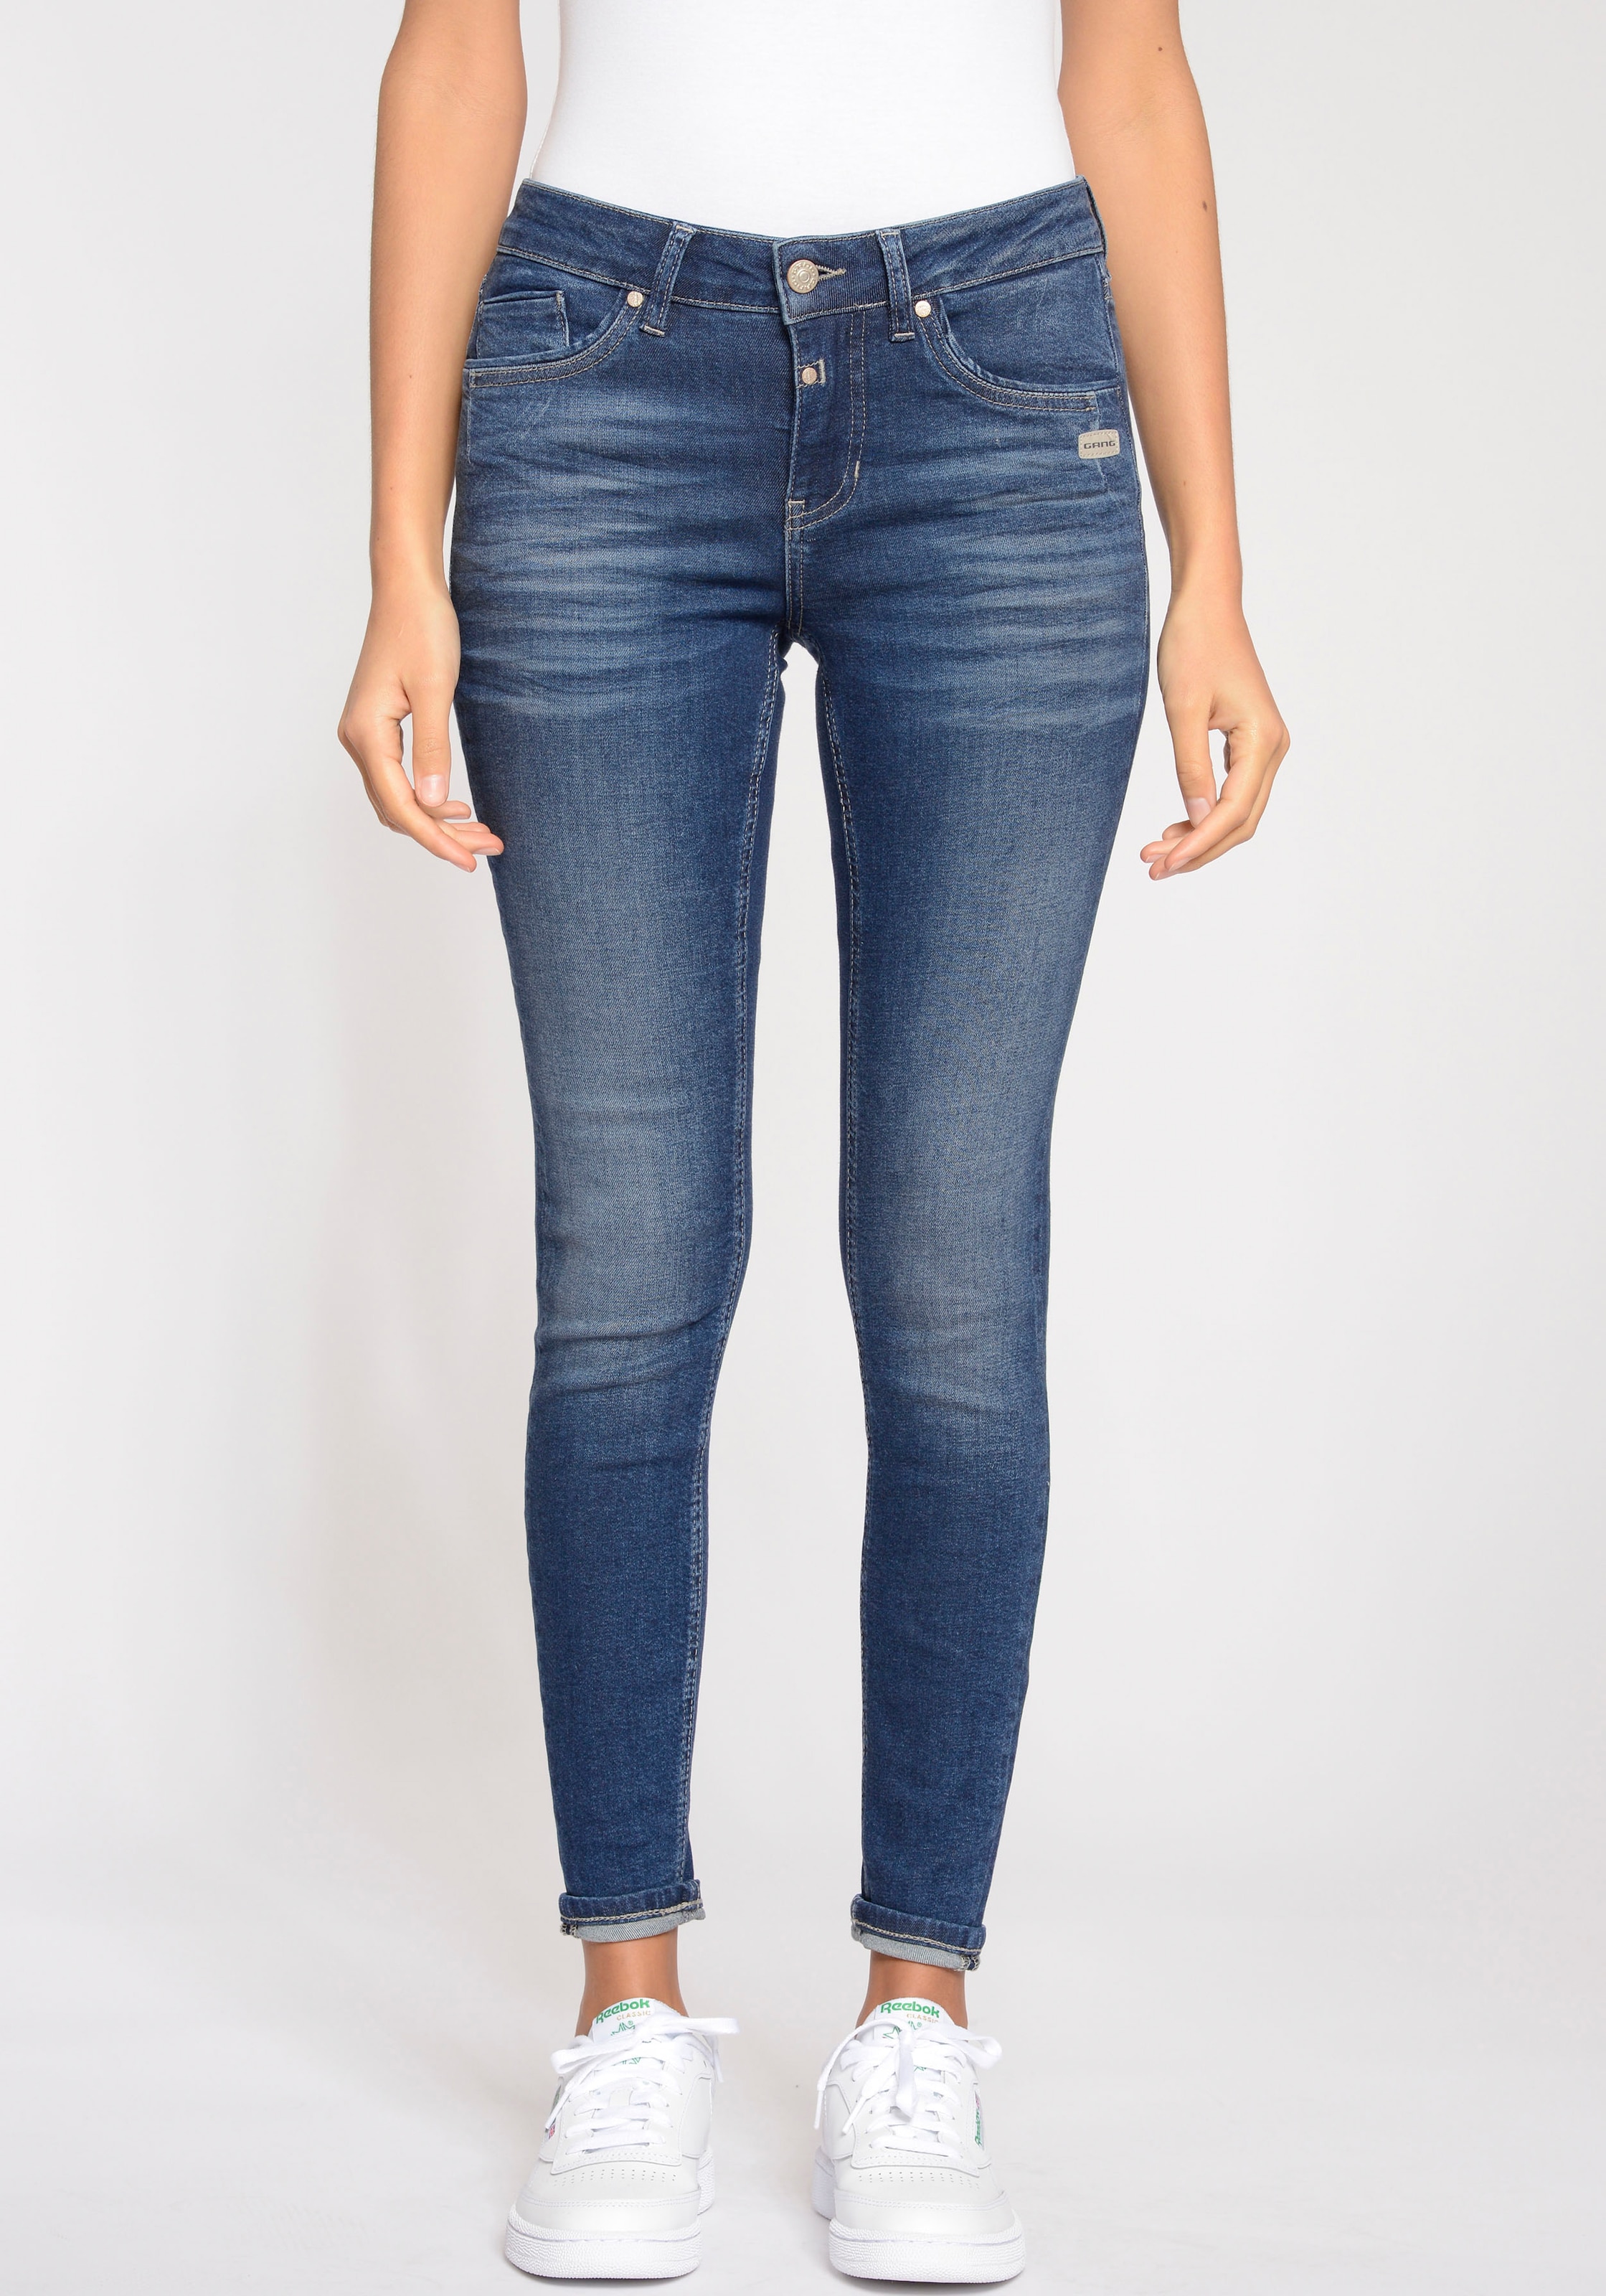 ♕ »94LAYLA« GANG bei Skinny-fit-Jeans